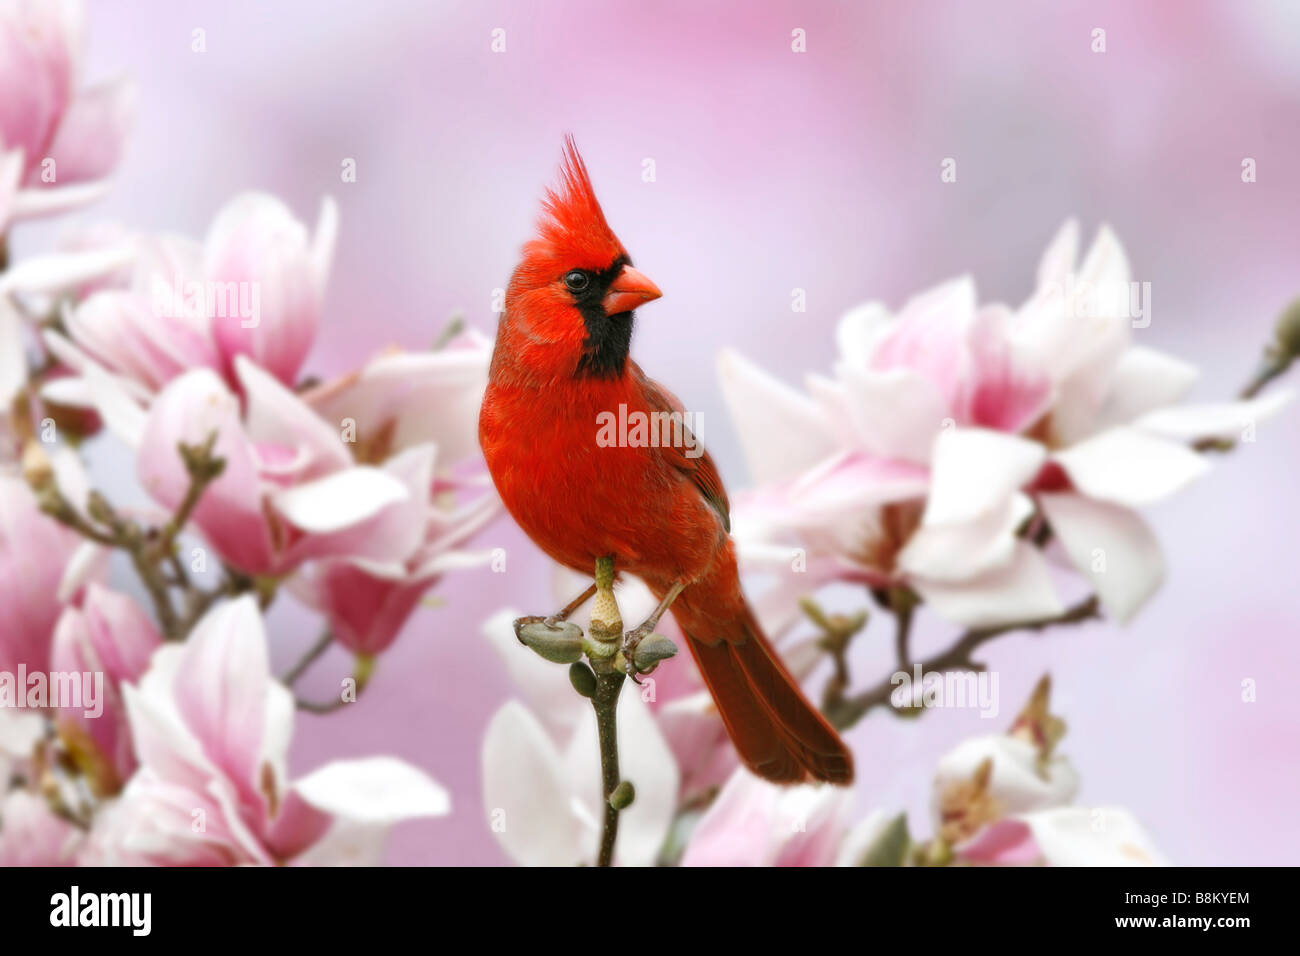 Northern Cardinal Perched in Magnolia Tree Blossoms Stock Photo